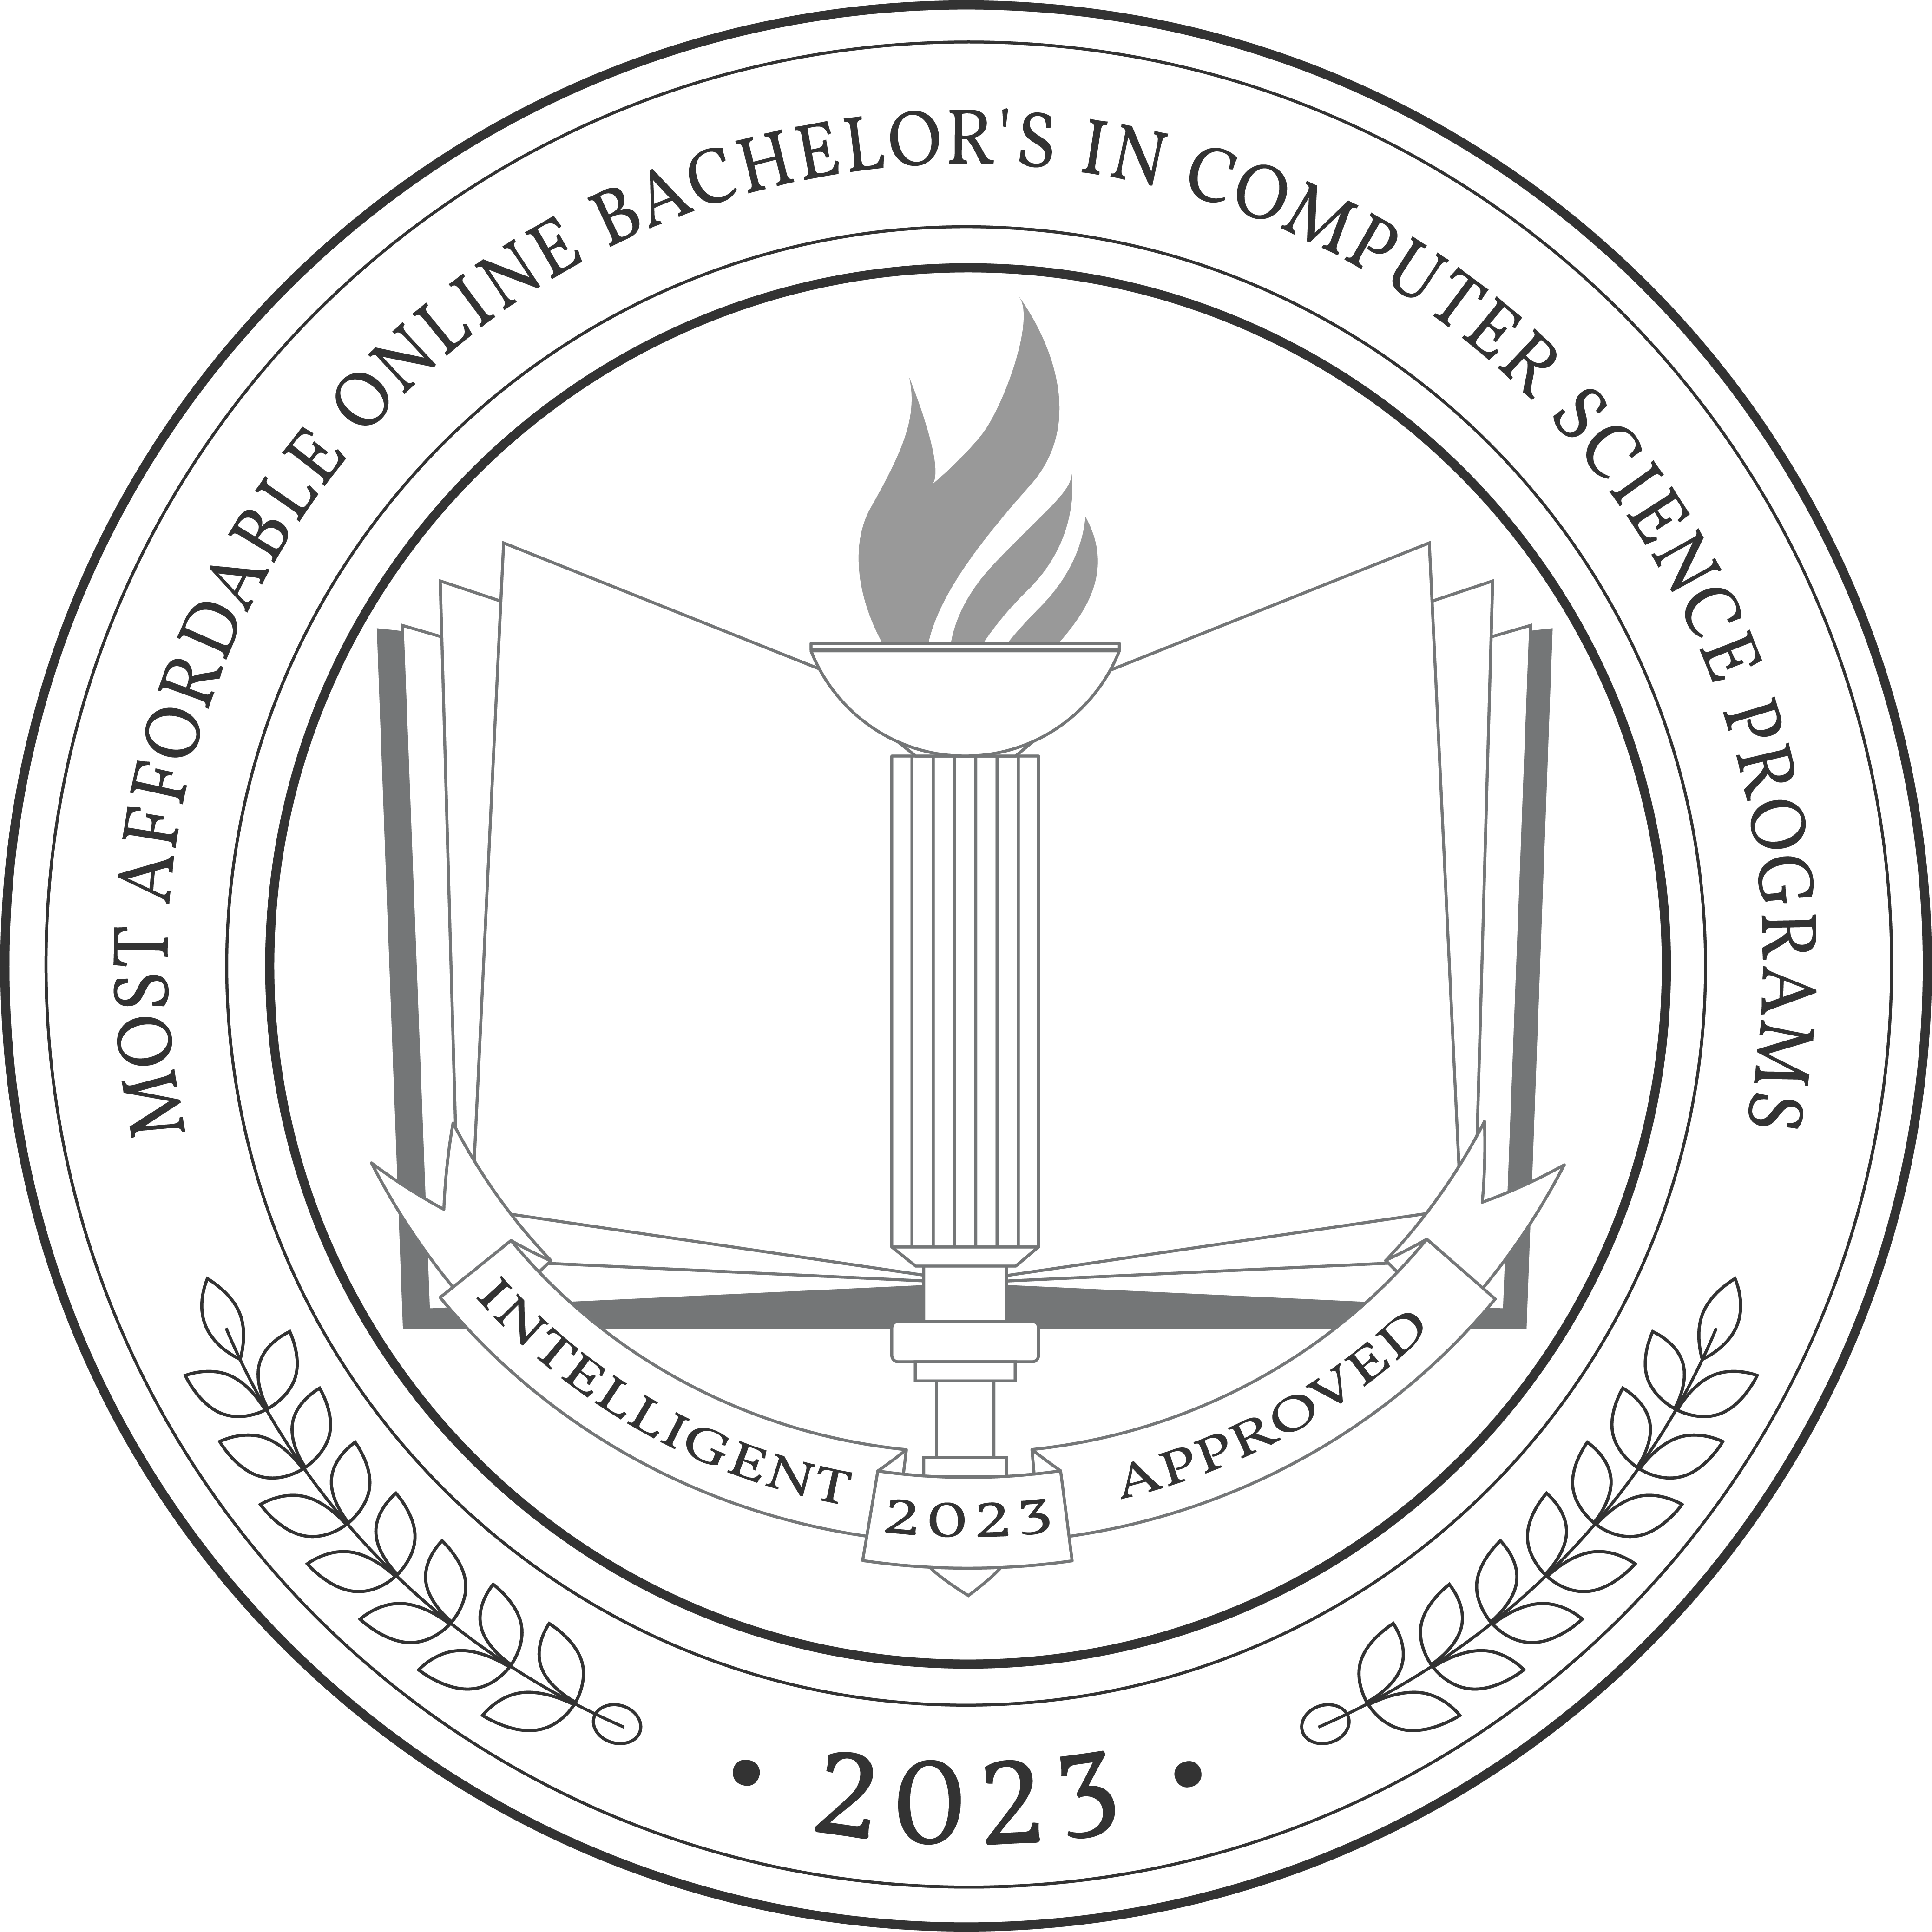 Most Affordable Online Bachelor's in Computer Science Programs badge